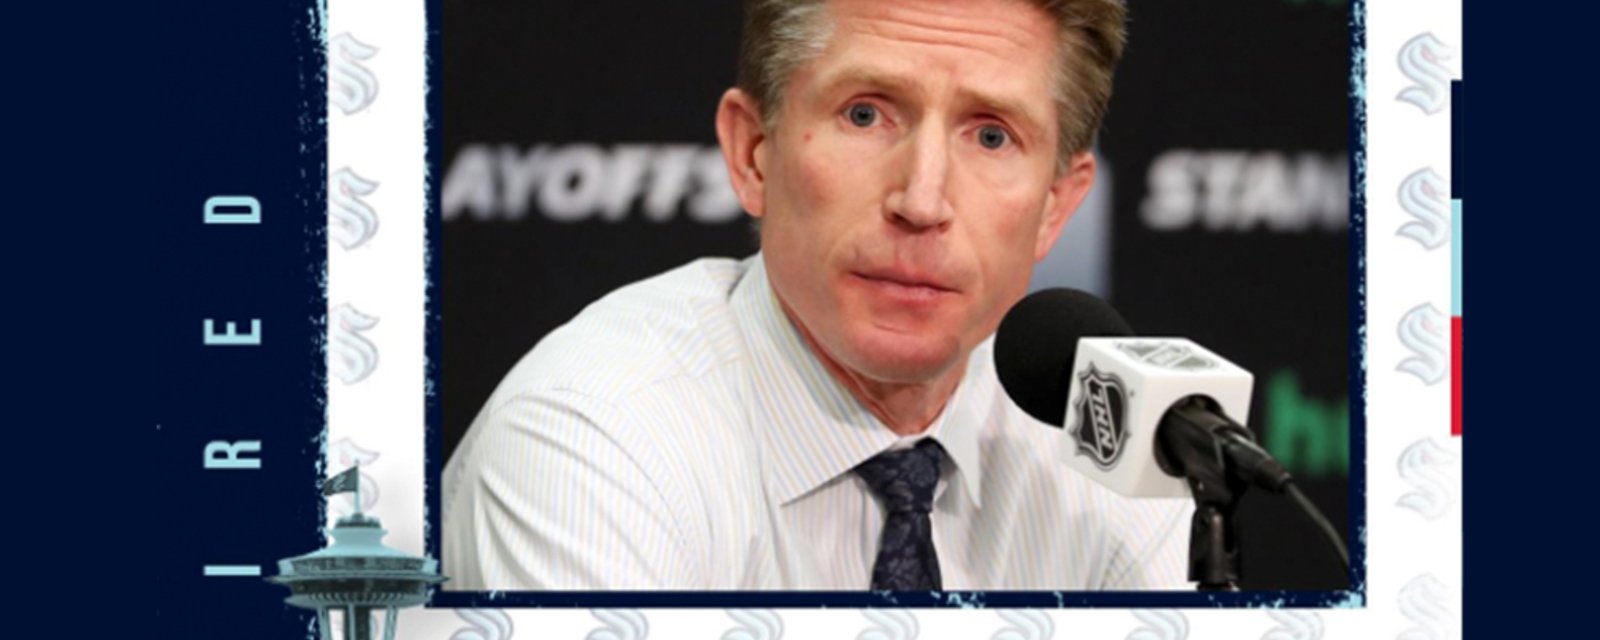 Kraken officially introduce Dave Hakstol as the first head coach in franchise history